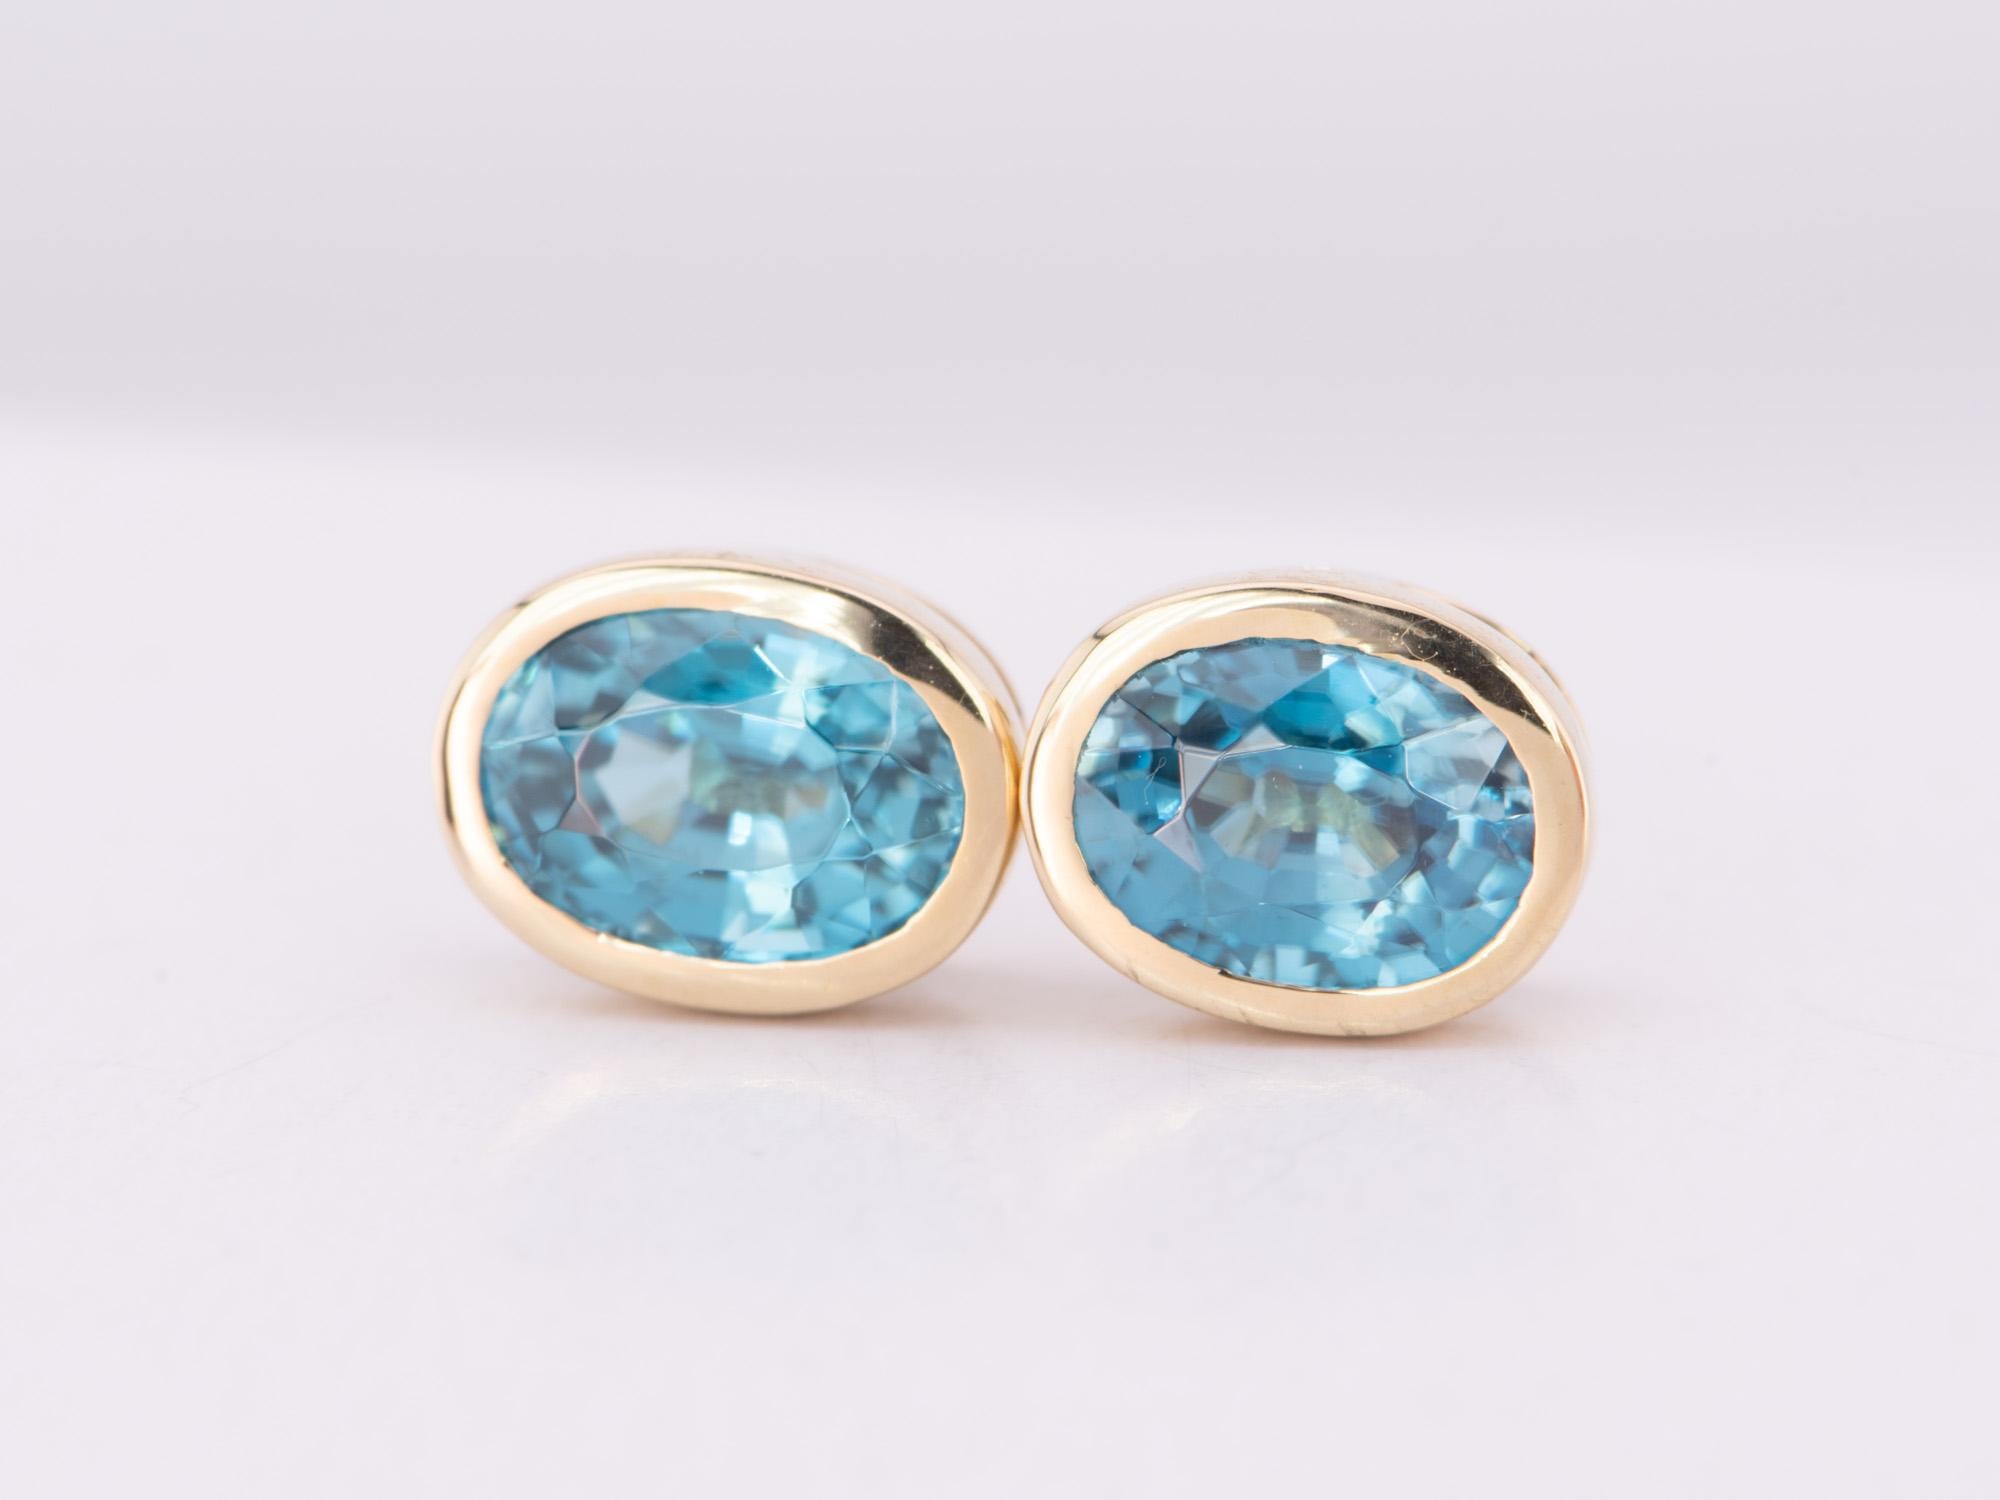 ♥ Natural Blue Zircon Bezel Set Ear Studs 14K Gold Rainbow Collection
♥ The item measures 8mm in length, 6.3mm in width, and 4.3mm in height.

♥ Material: 14K Gold
♥ Gemstone: Zircon, 2.92ct 
♥ All stone(s) used are genuine, earth-mined, and